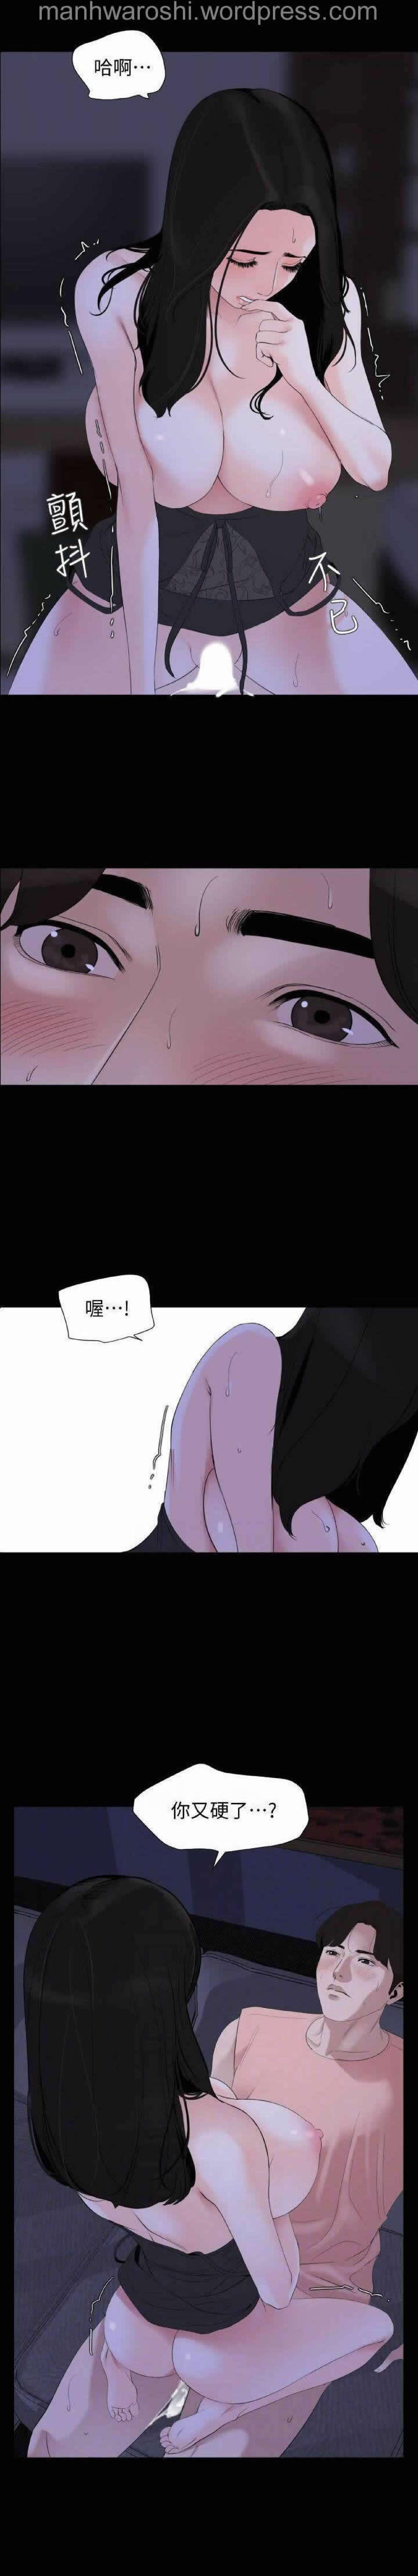 Don’t Be Like This! Son-In-Law | 与岳母同屋 第 6 [Chinese] Manhwa 